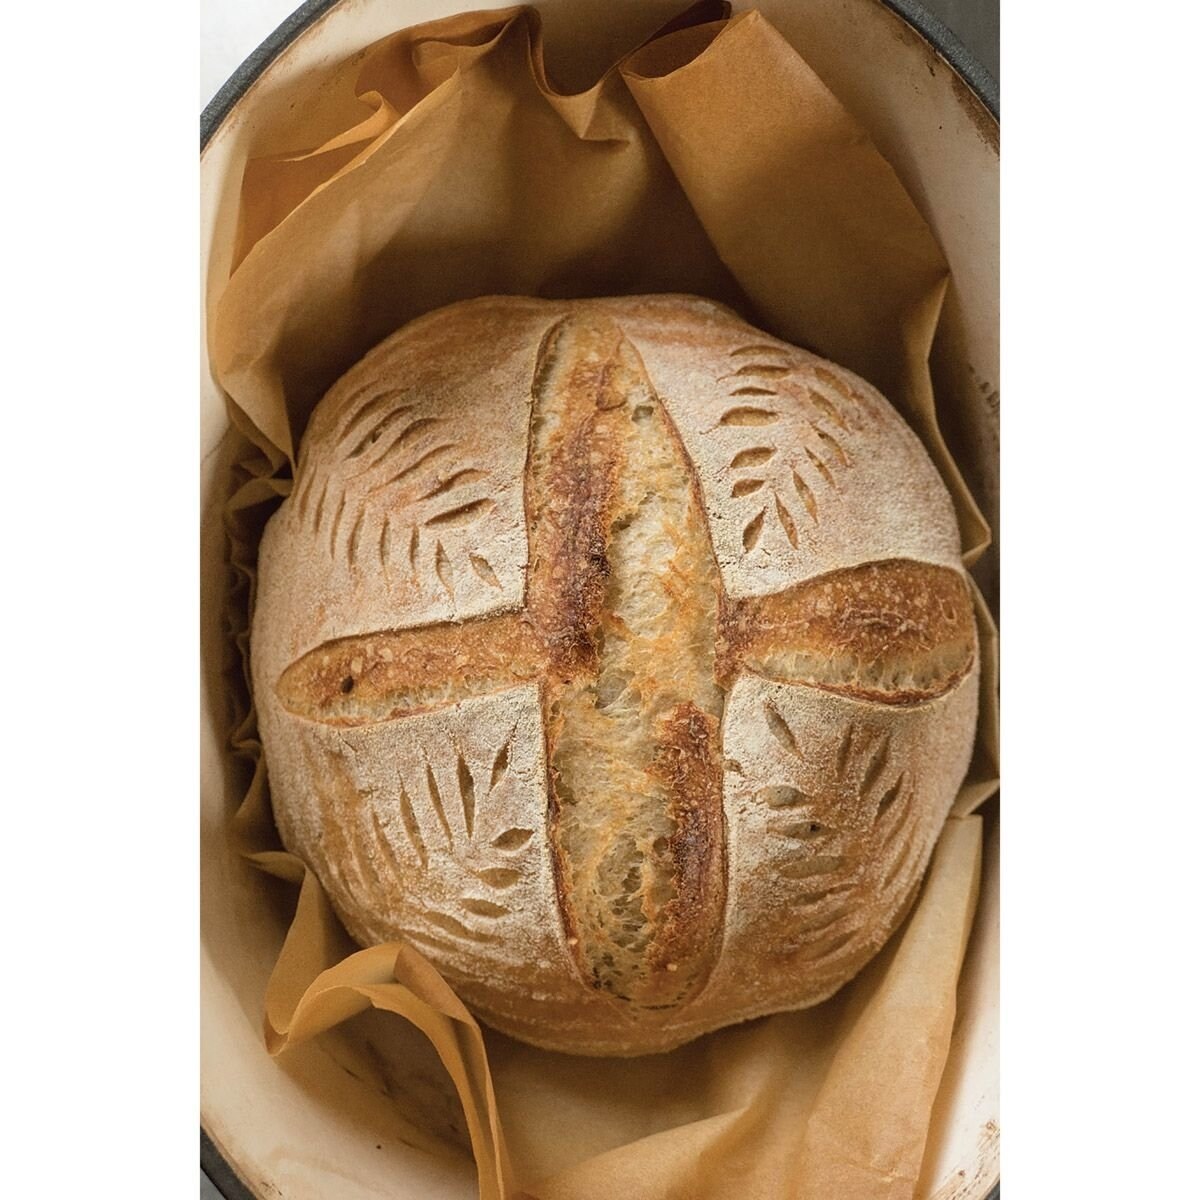 Mrs Anderson's Stainless Steel Artisan Bread Lame with 15 Blades - Easily Scores Dough To Create Detailed Crusts - 1 Pack